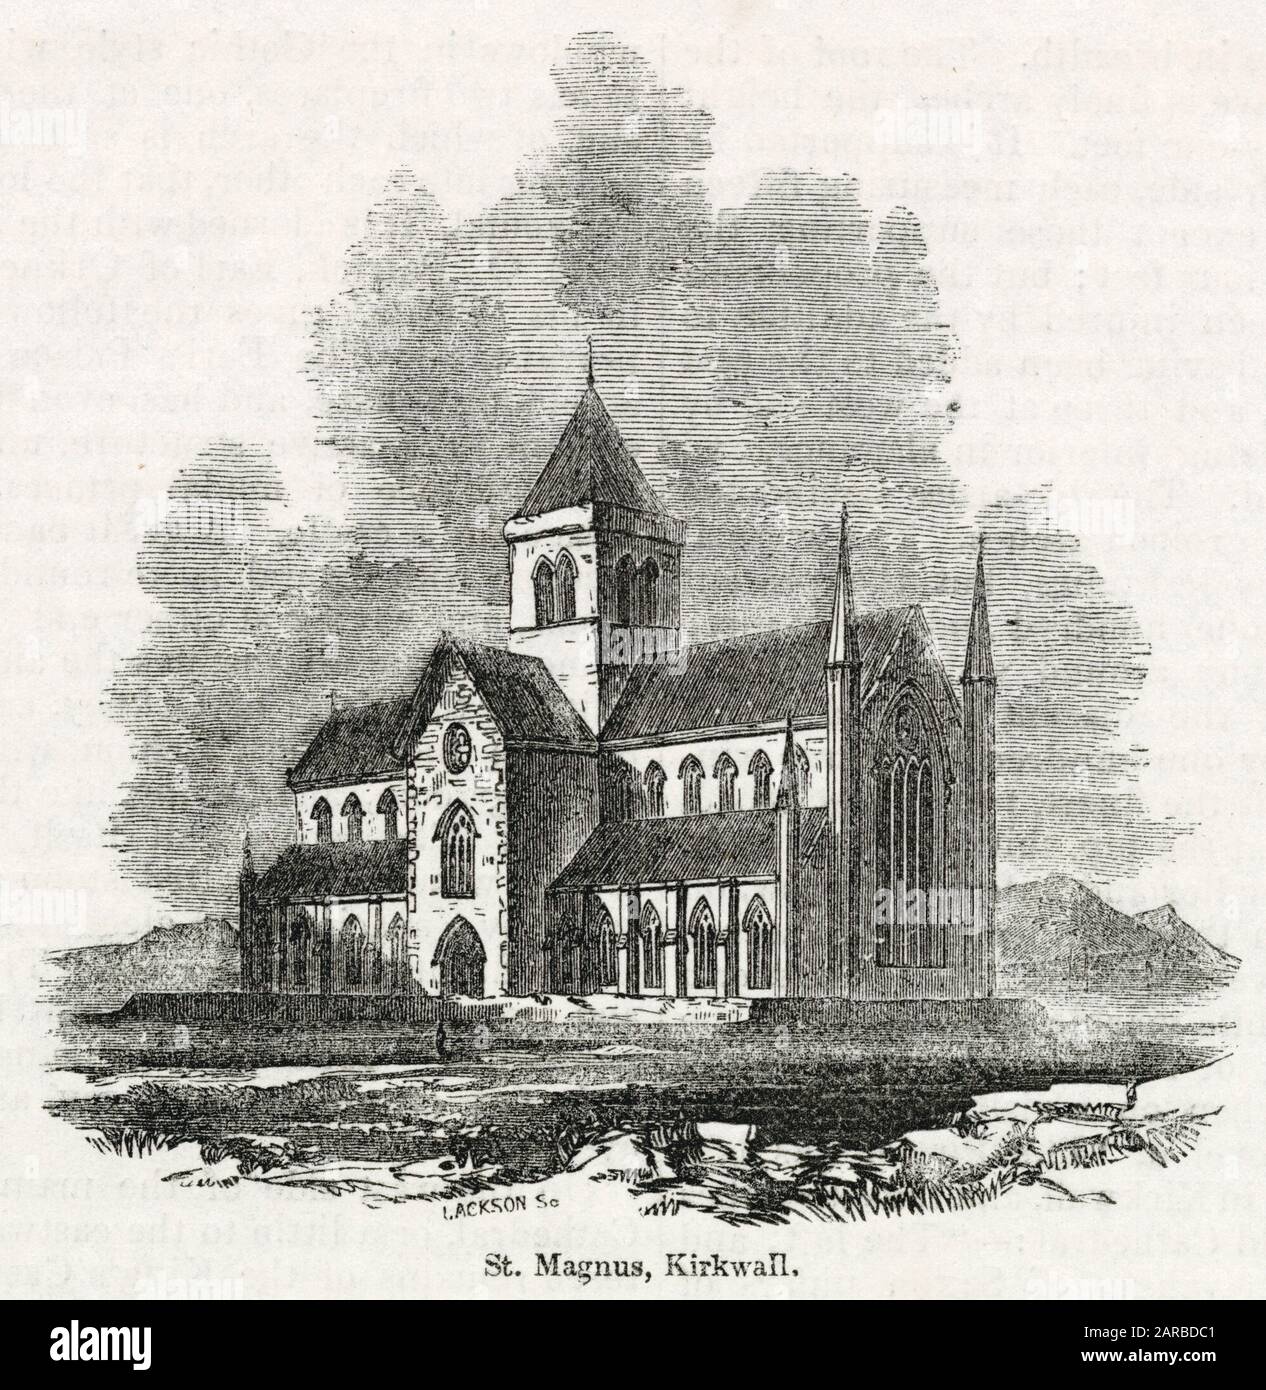 St Magnus Cathedral, Kirkwall, Orkney Islands, Scotland, dating back to the 12th century.      Date: circa 1845 Stock Photo